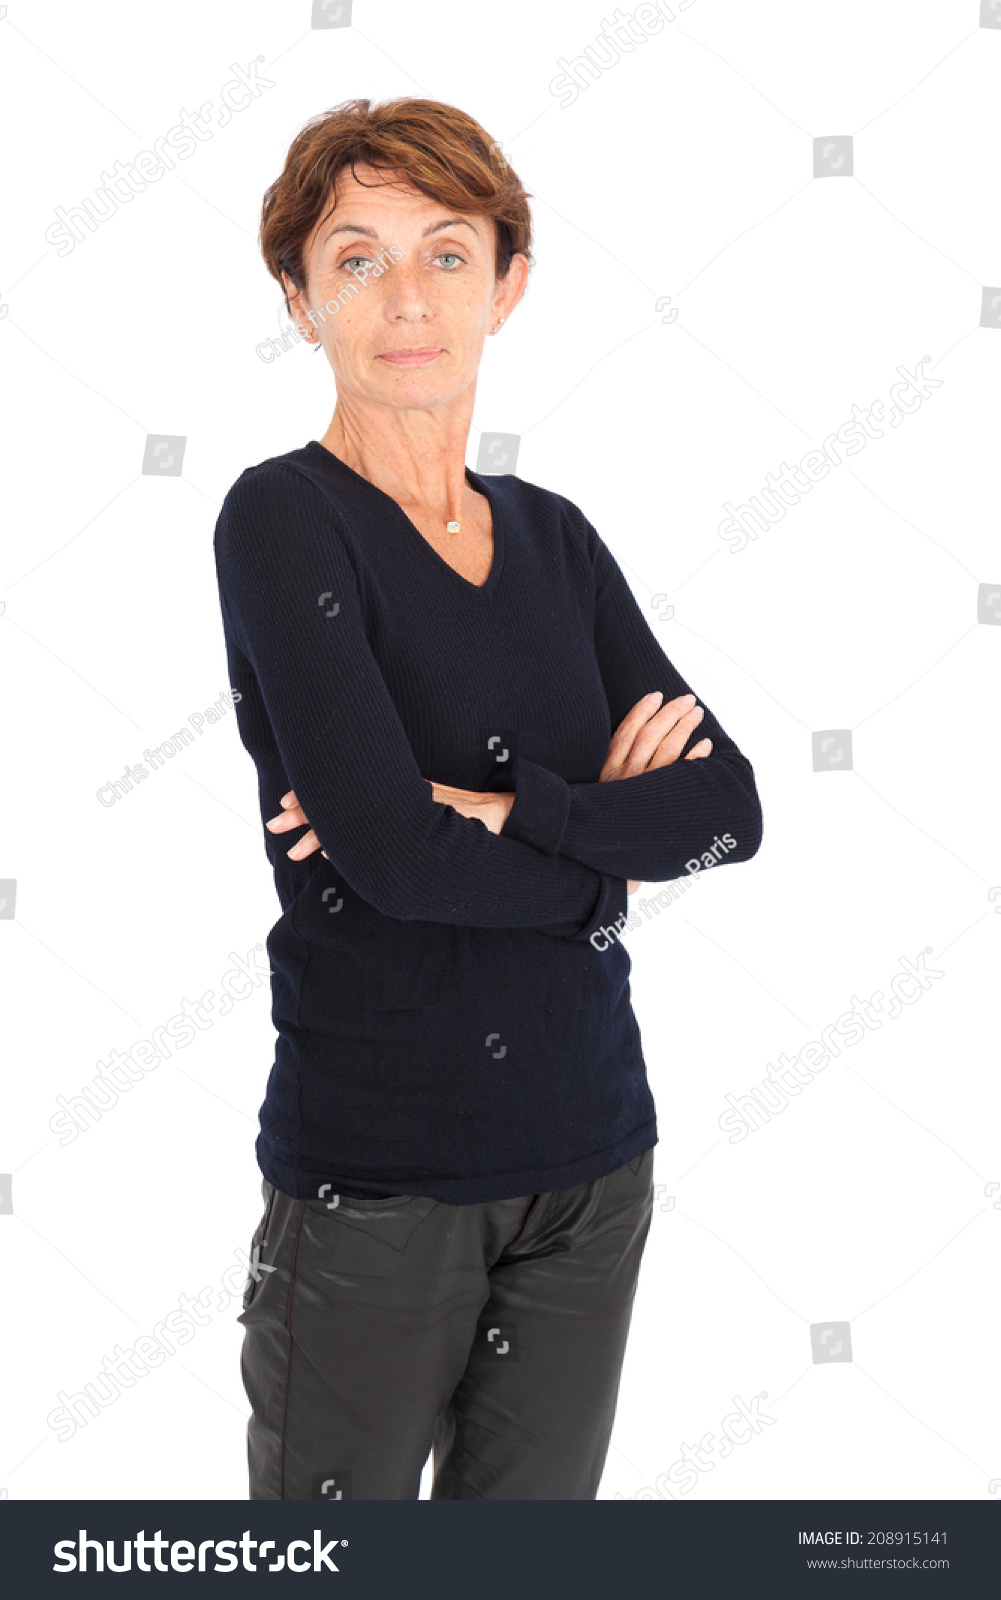 Beautiful woman doing different expressions in different sets of clothes: arms crossed #208915141